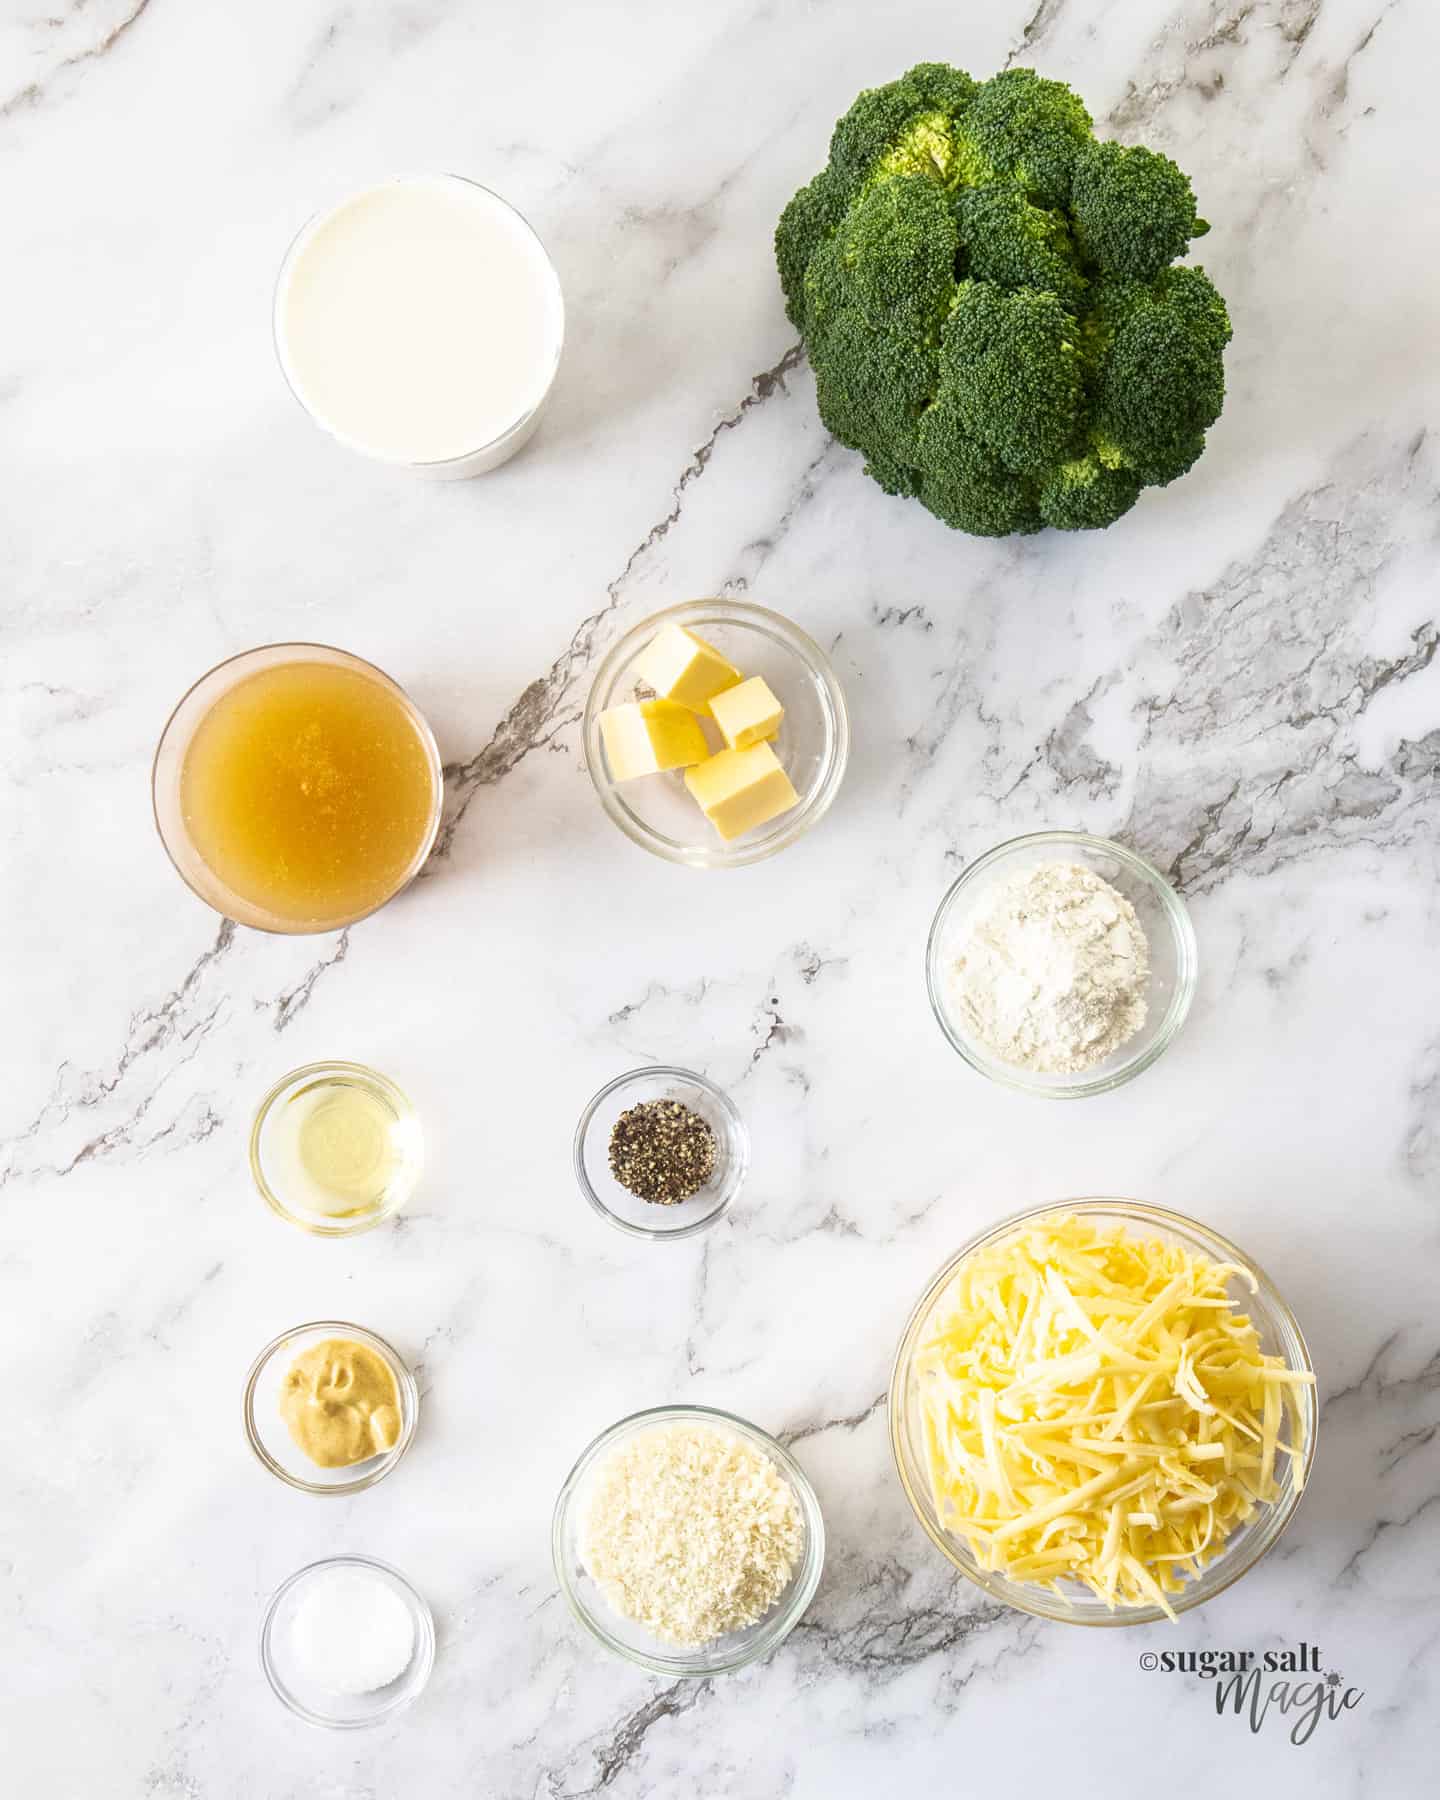 Ingredients for broccoli cheese bake on a marble bench.